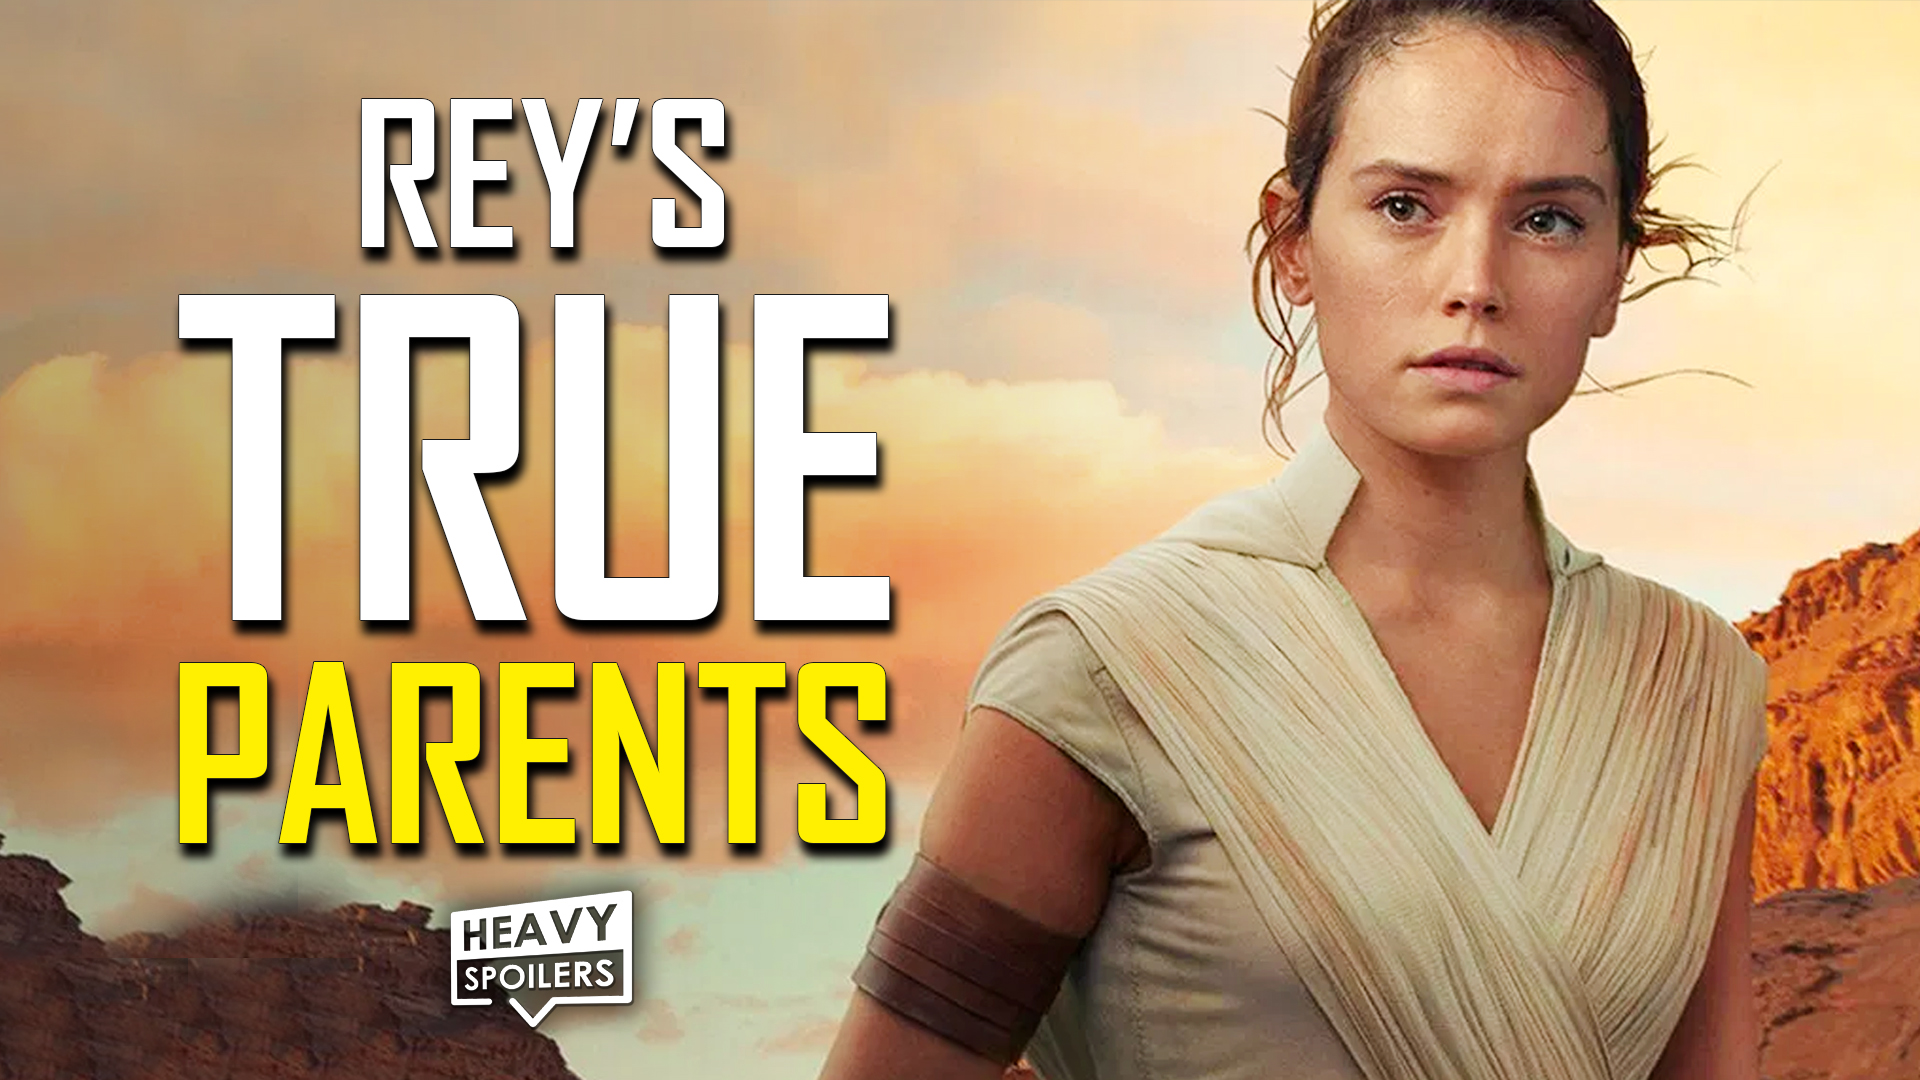 star wars episode 9 rise of skywalker reys parents identity revealed palpatine is the grandfather of rey qi ra theory new plot leak breakdown explained ending explained spoilers